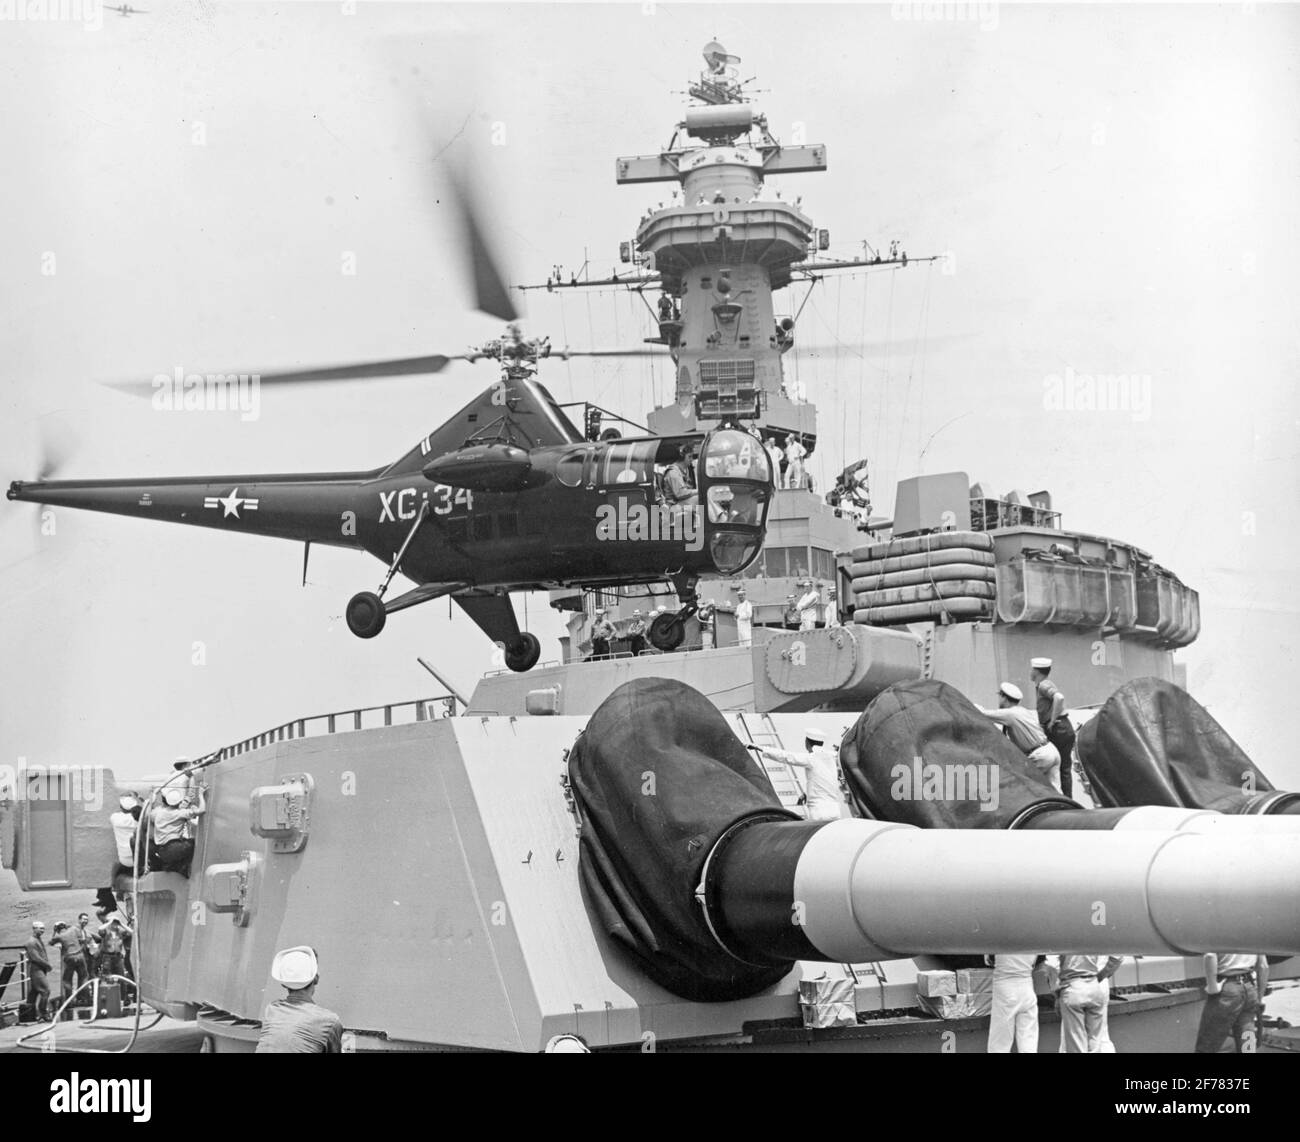 USS Missouri (BB-63) Sikorsky HO3S-1 helicopter landing on the forward 16-inch gun turret, during the 1948 Midshipmen's cruise. Guard mail, ships' newspapers and personnel were exchanged via helicopter while the Midshipmen's cruise squadron was at sea. Most exchanges were made by hovering pick-up. The forward turret was used as a landing platform since the floatplane catapults on the ship's fantail prevented helicopters from operating there. Photo was filed 13 September 1948. Official U.S. Navy Photograph Stock Photo